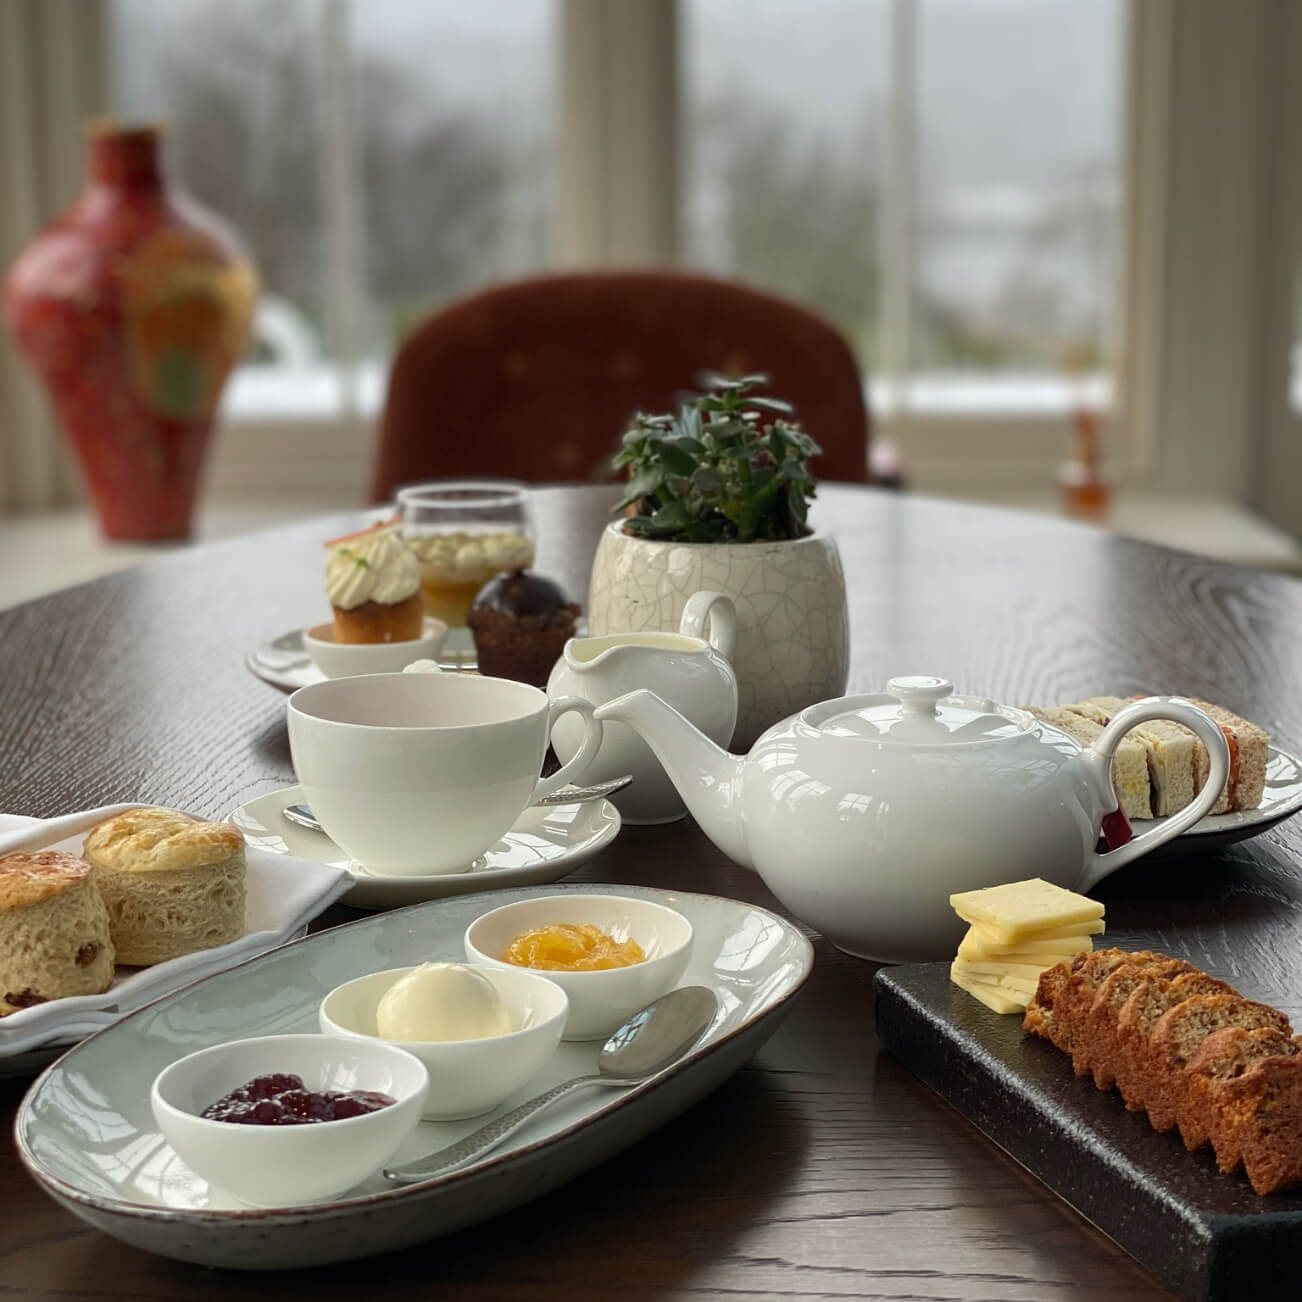 Afternoon Tea at Linthwaite House